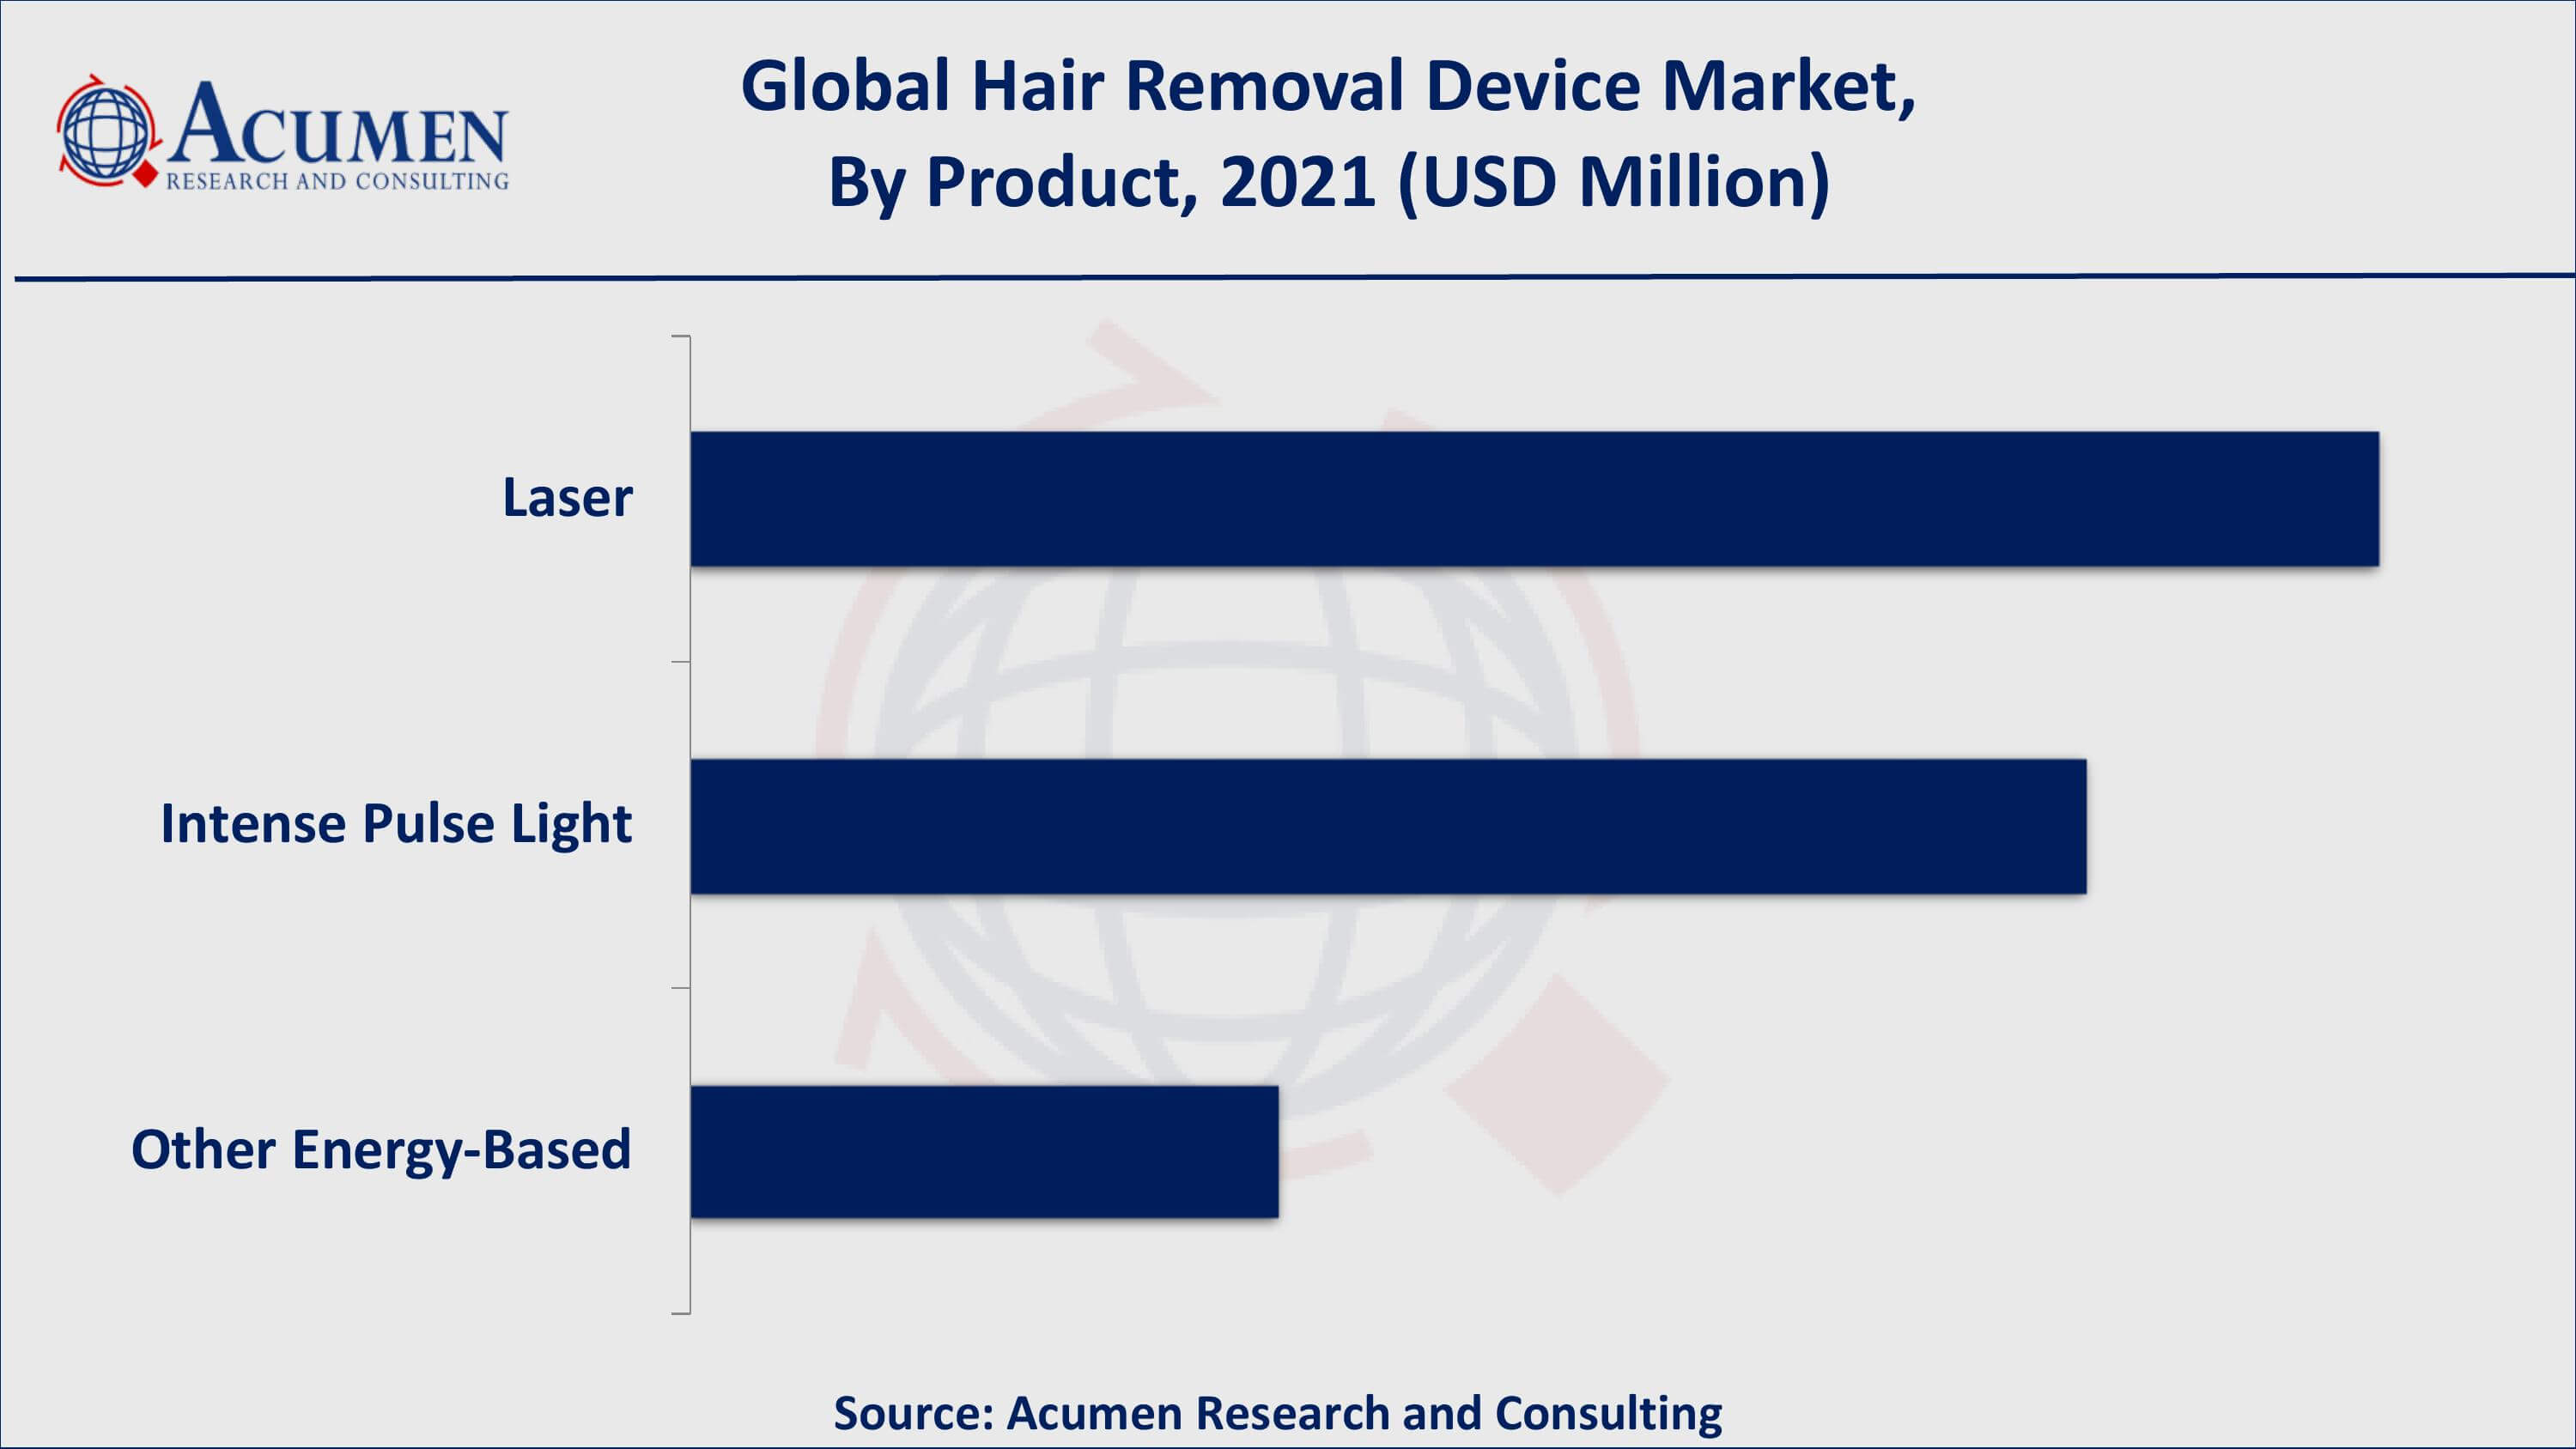 Based on product, laser acquired over 46% of the overall market share in 2021